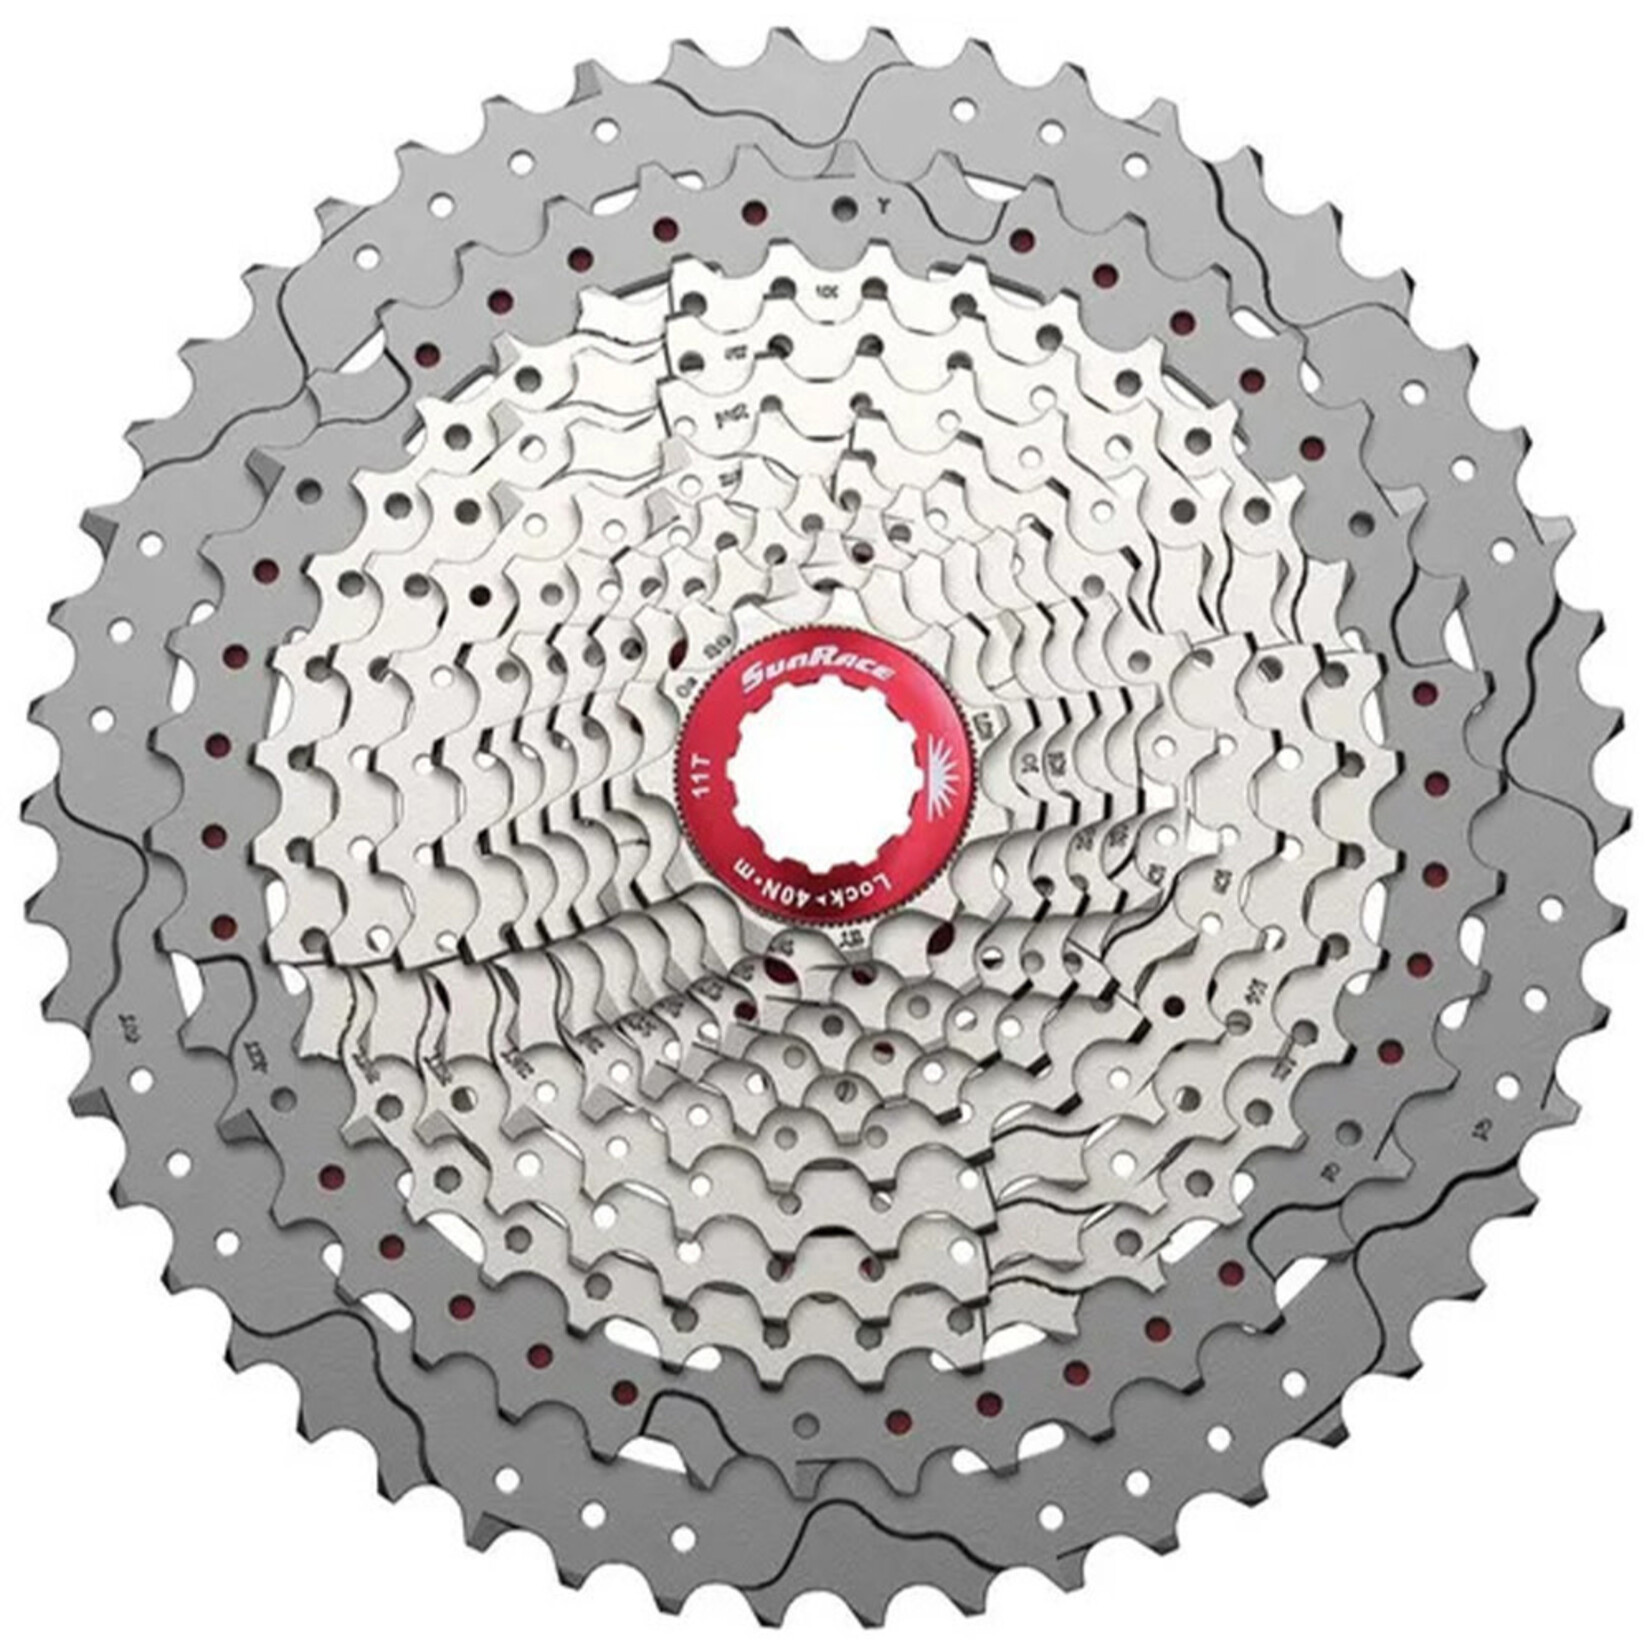 CASSETTE - 12 Speed, 11-50T, metallic silver  Compatible Shimano standard splined freehub body or Sram road type freehub which share the same spline set up, SRAM XD driver hub is NOT compatible;